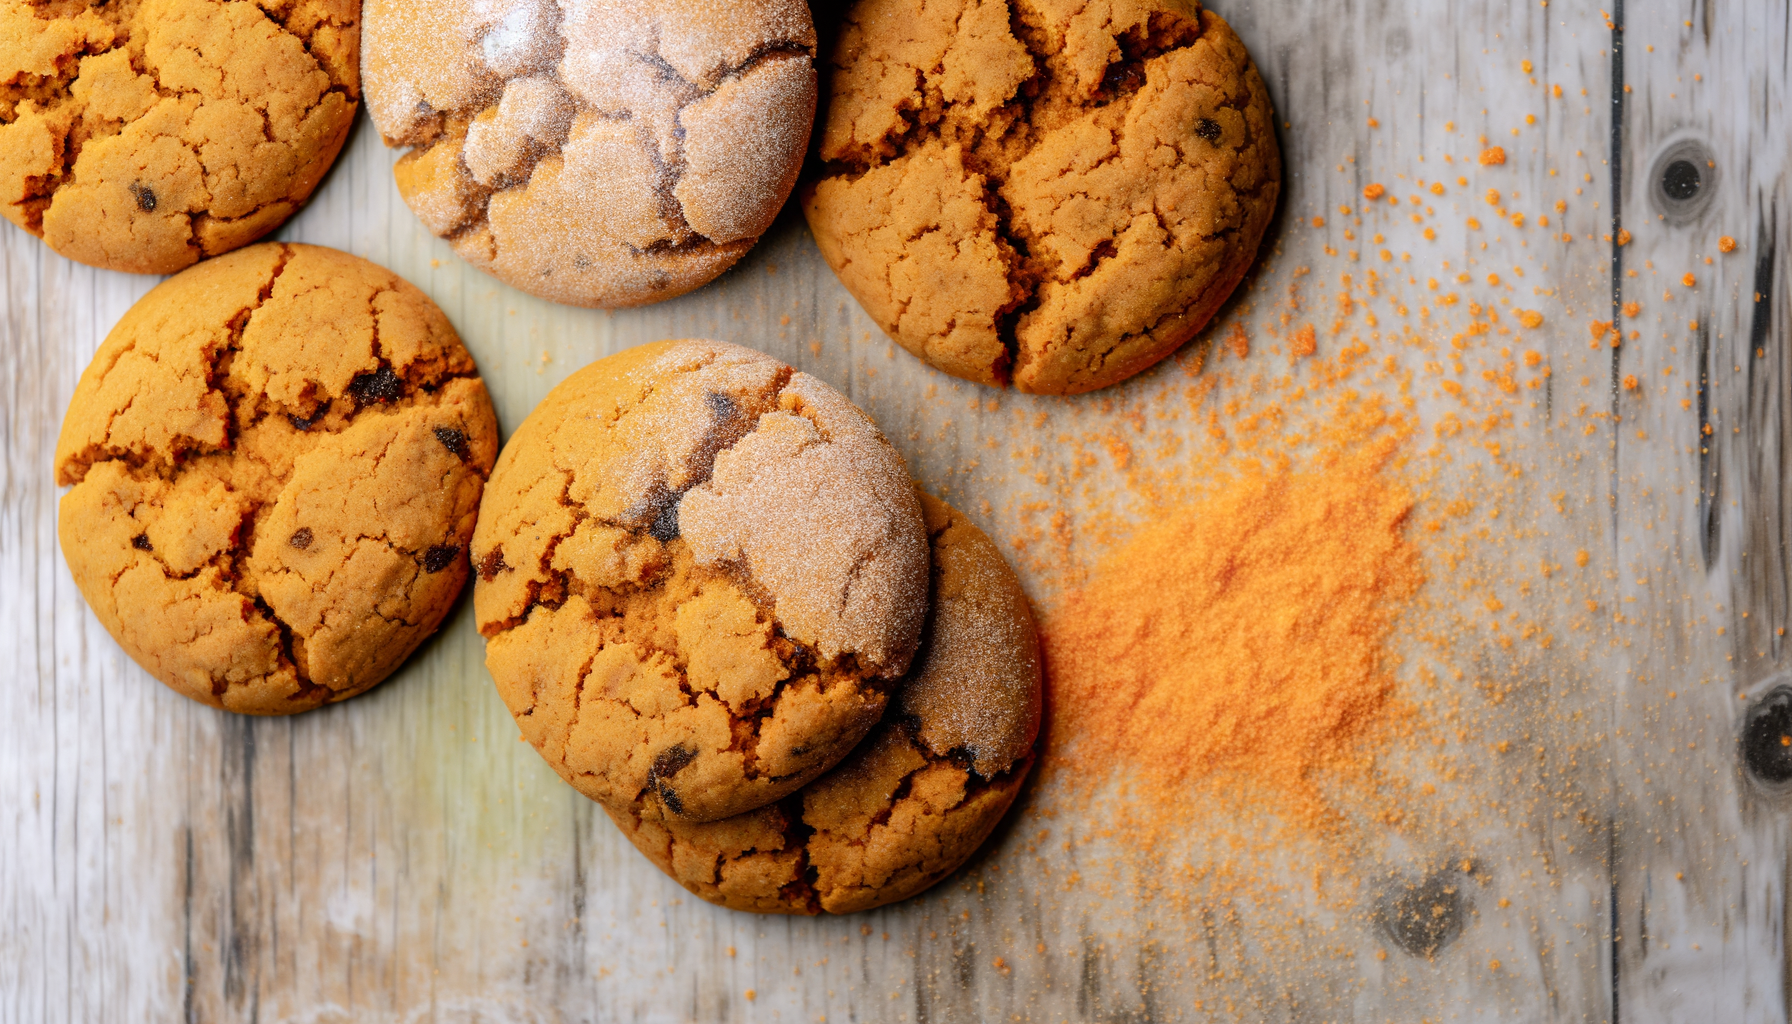 Homemade Big Soft Ginger Cookies, dusted with sugar, offer a spicy bite with a sweet finish on a rustic table.